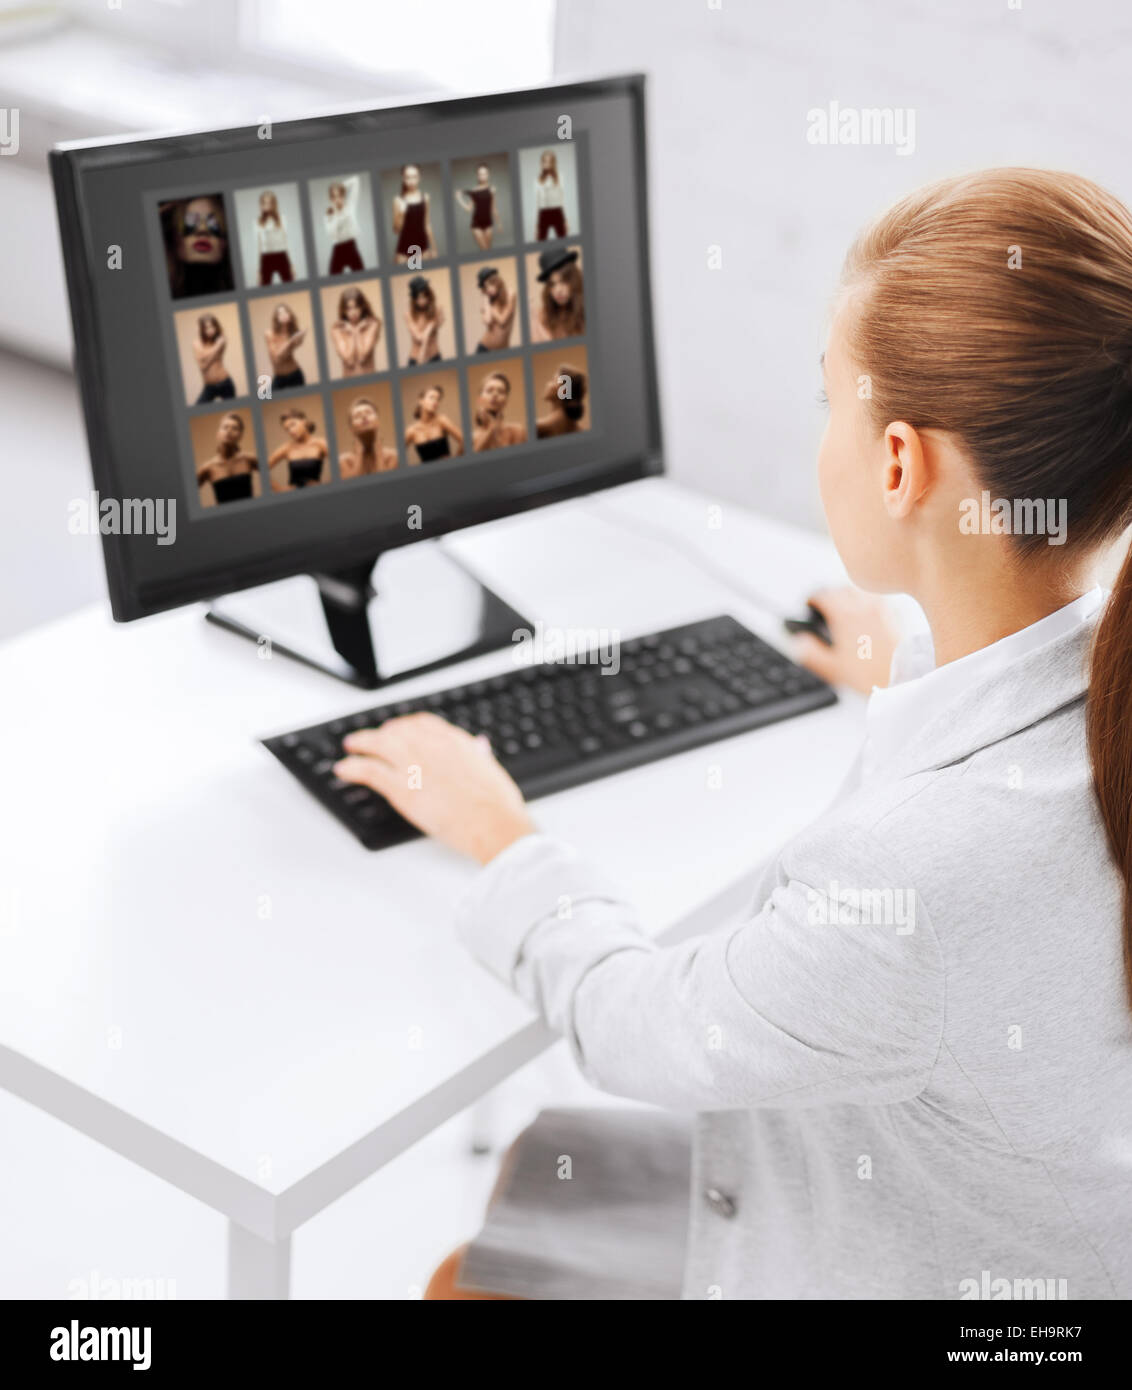 editor choosing pictures from computer monitor Stock Photo